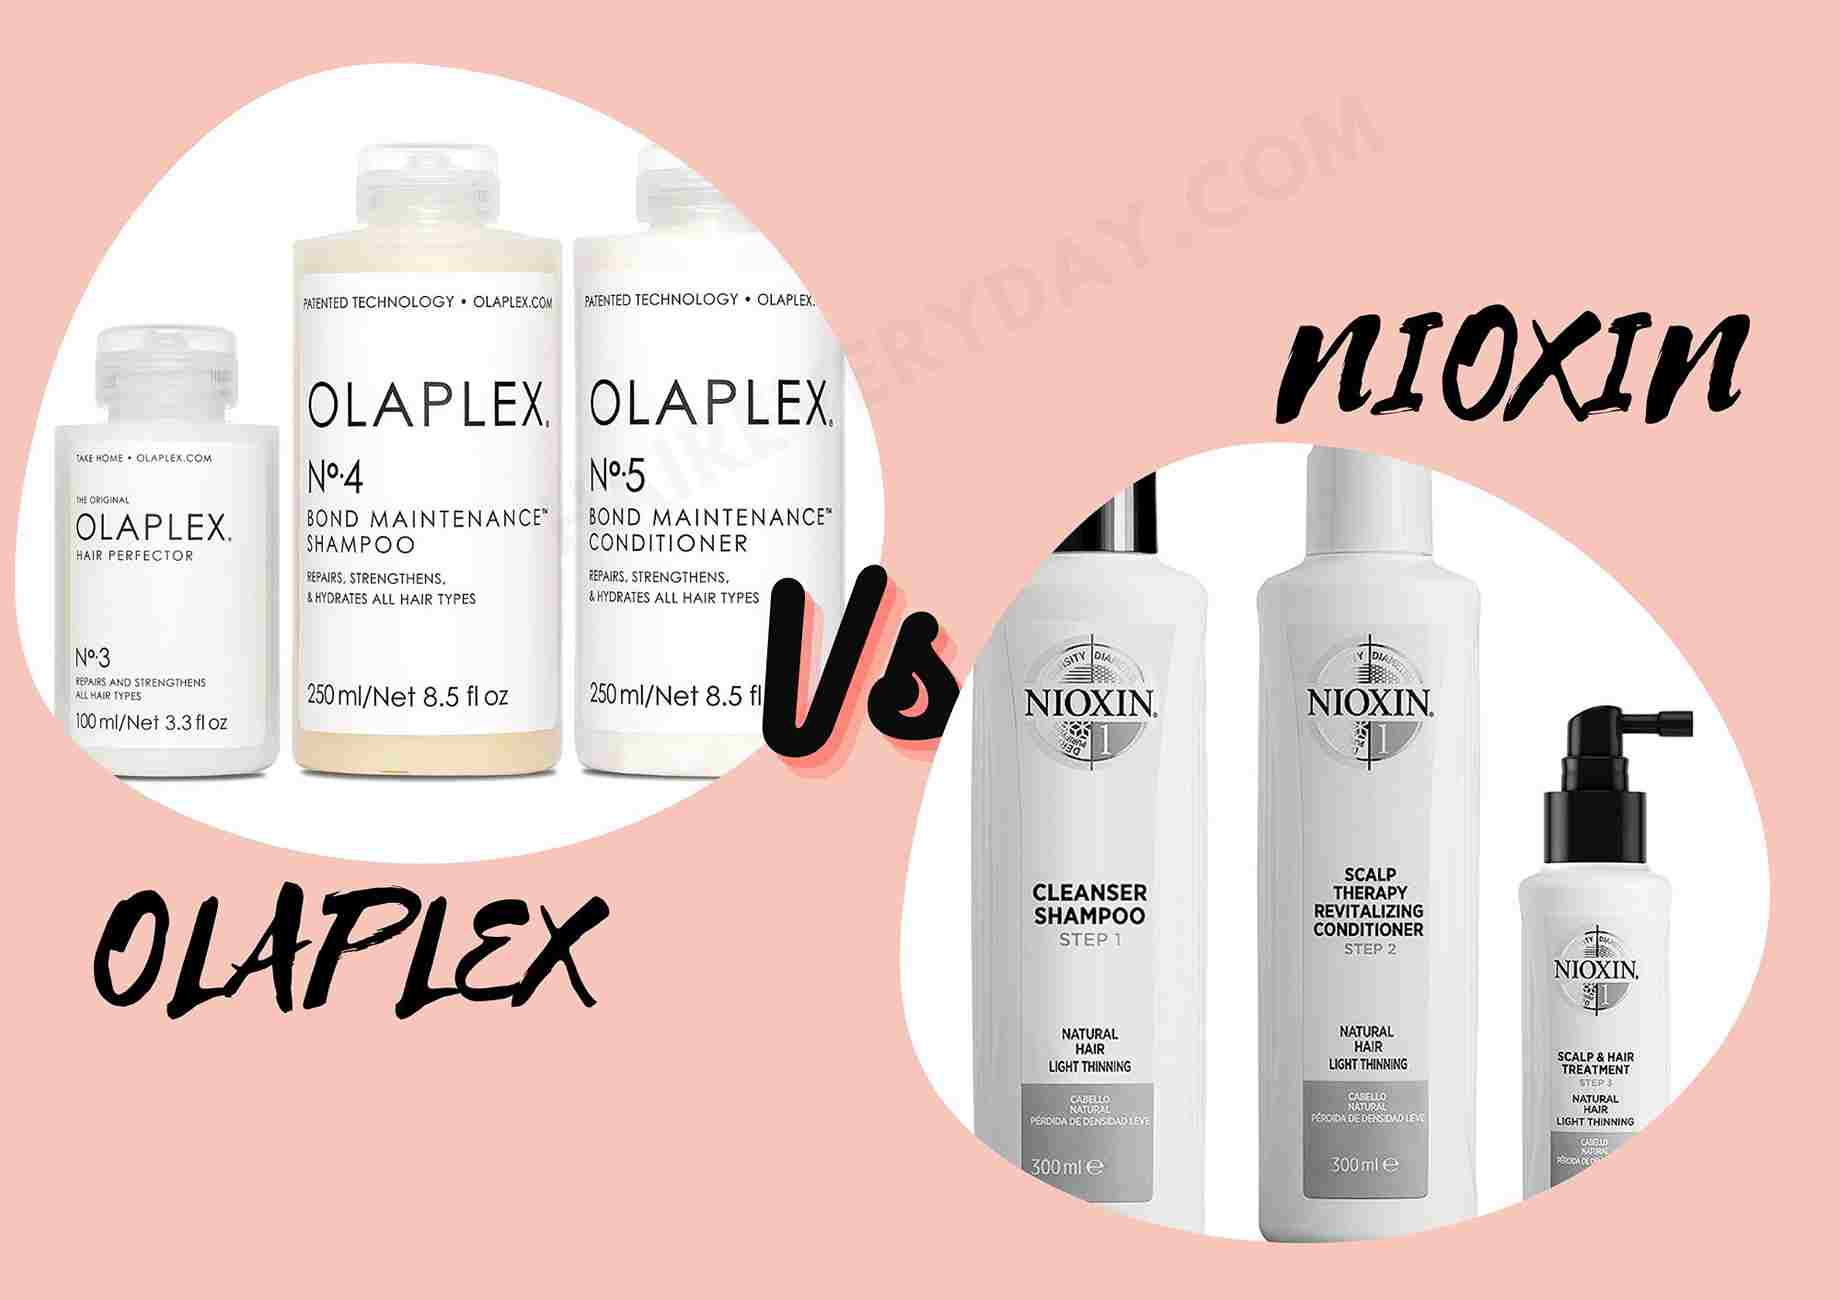 In 10 Minutes, I'll Give You The Truth About joico k pak vs olaplex